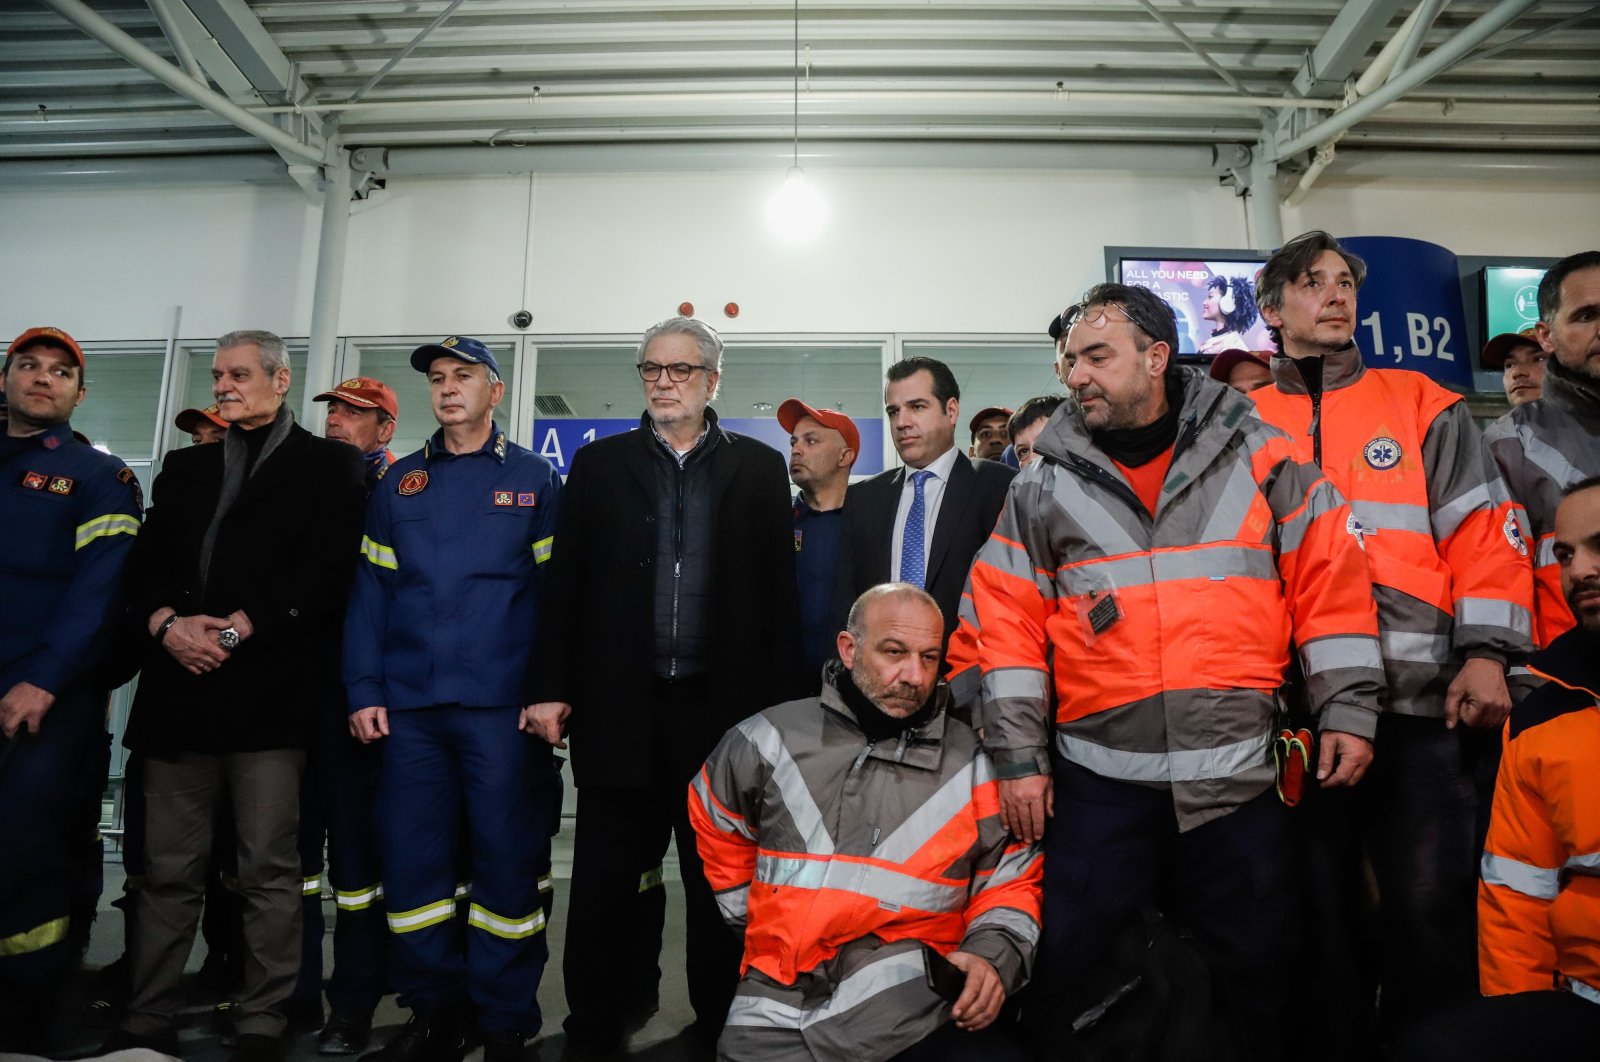 Greek emergency unit EMAK members pose for a picture at Athens Eleftherios Venizelos International Airport ahead of a press conference upon returning from a rescue mission in Türkiye&#039;s Hatay following deadly earthquakes, Greece, Feb. 13, 2023. (IHA Photo)